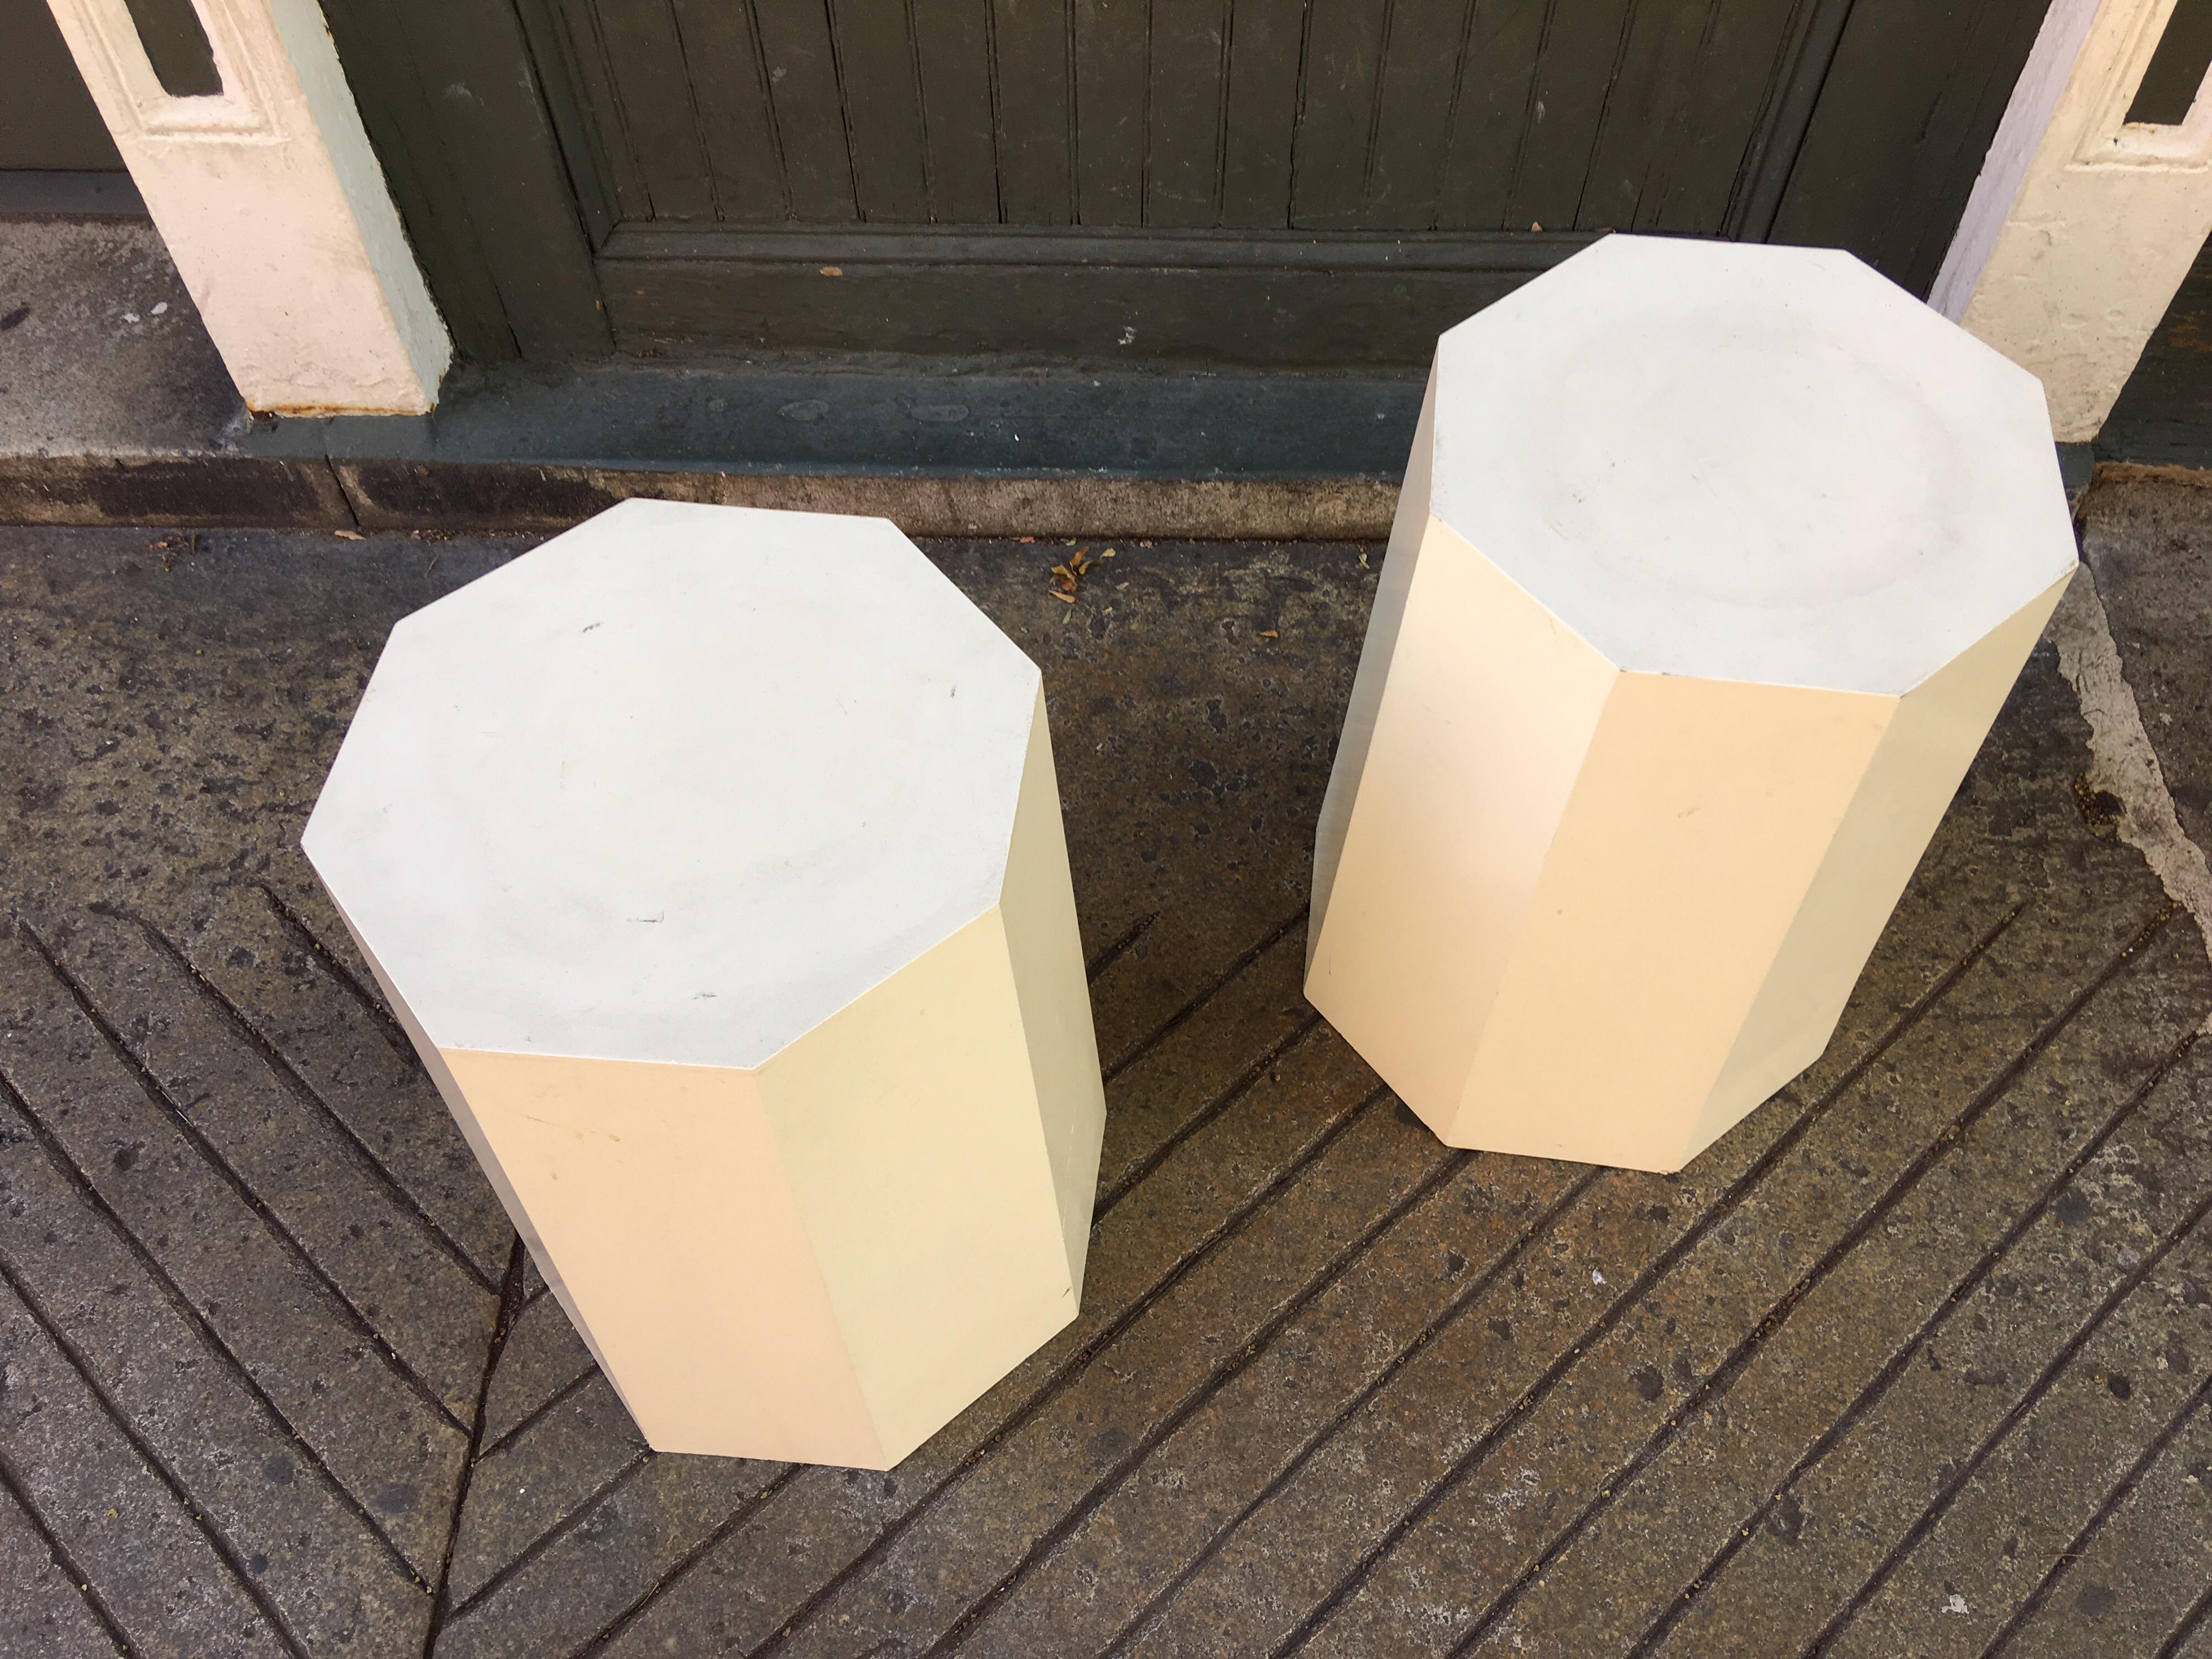 Pair of octagonal display stands. Stands taper down to a larger base. Great for art display or plants! Painted wood can easily be made any color!